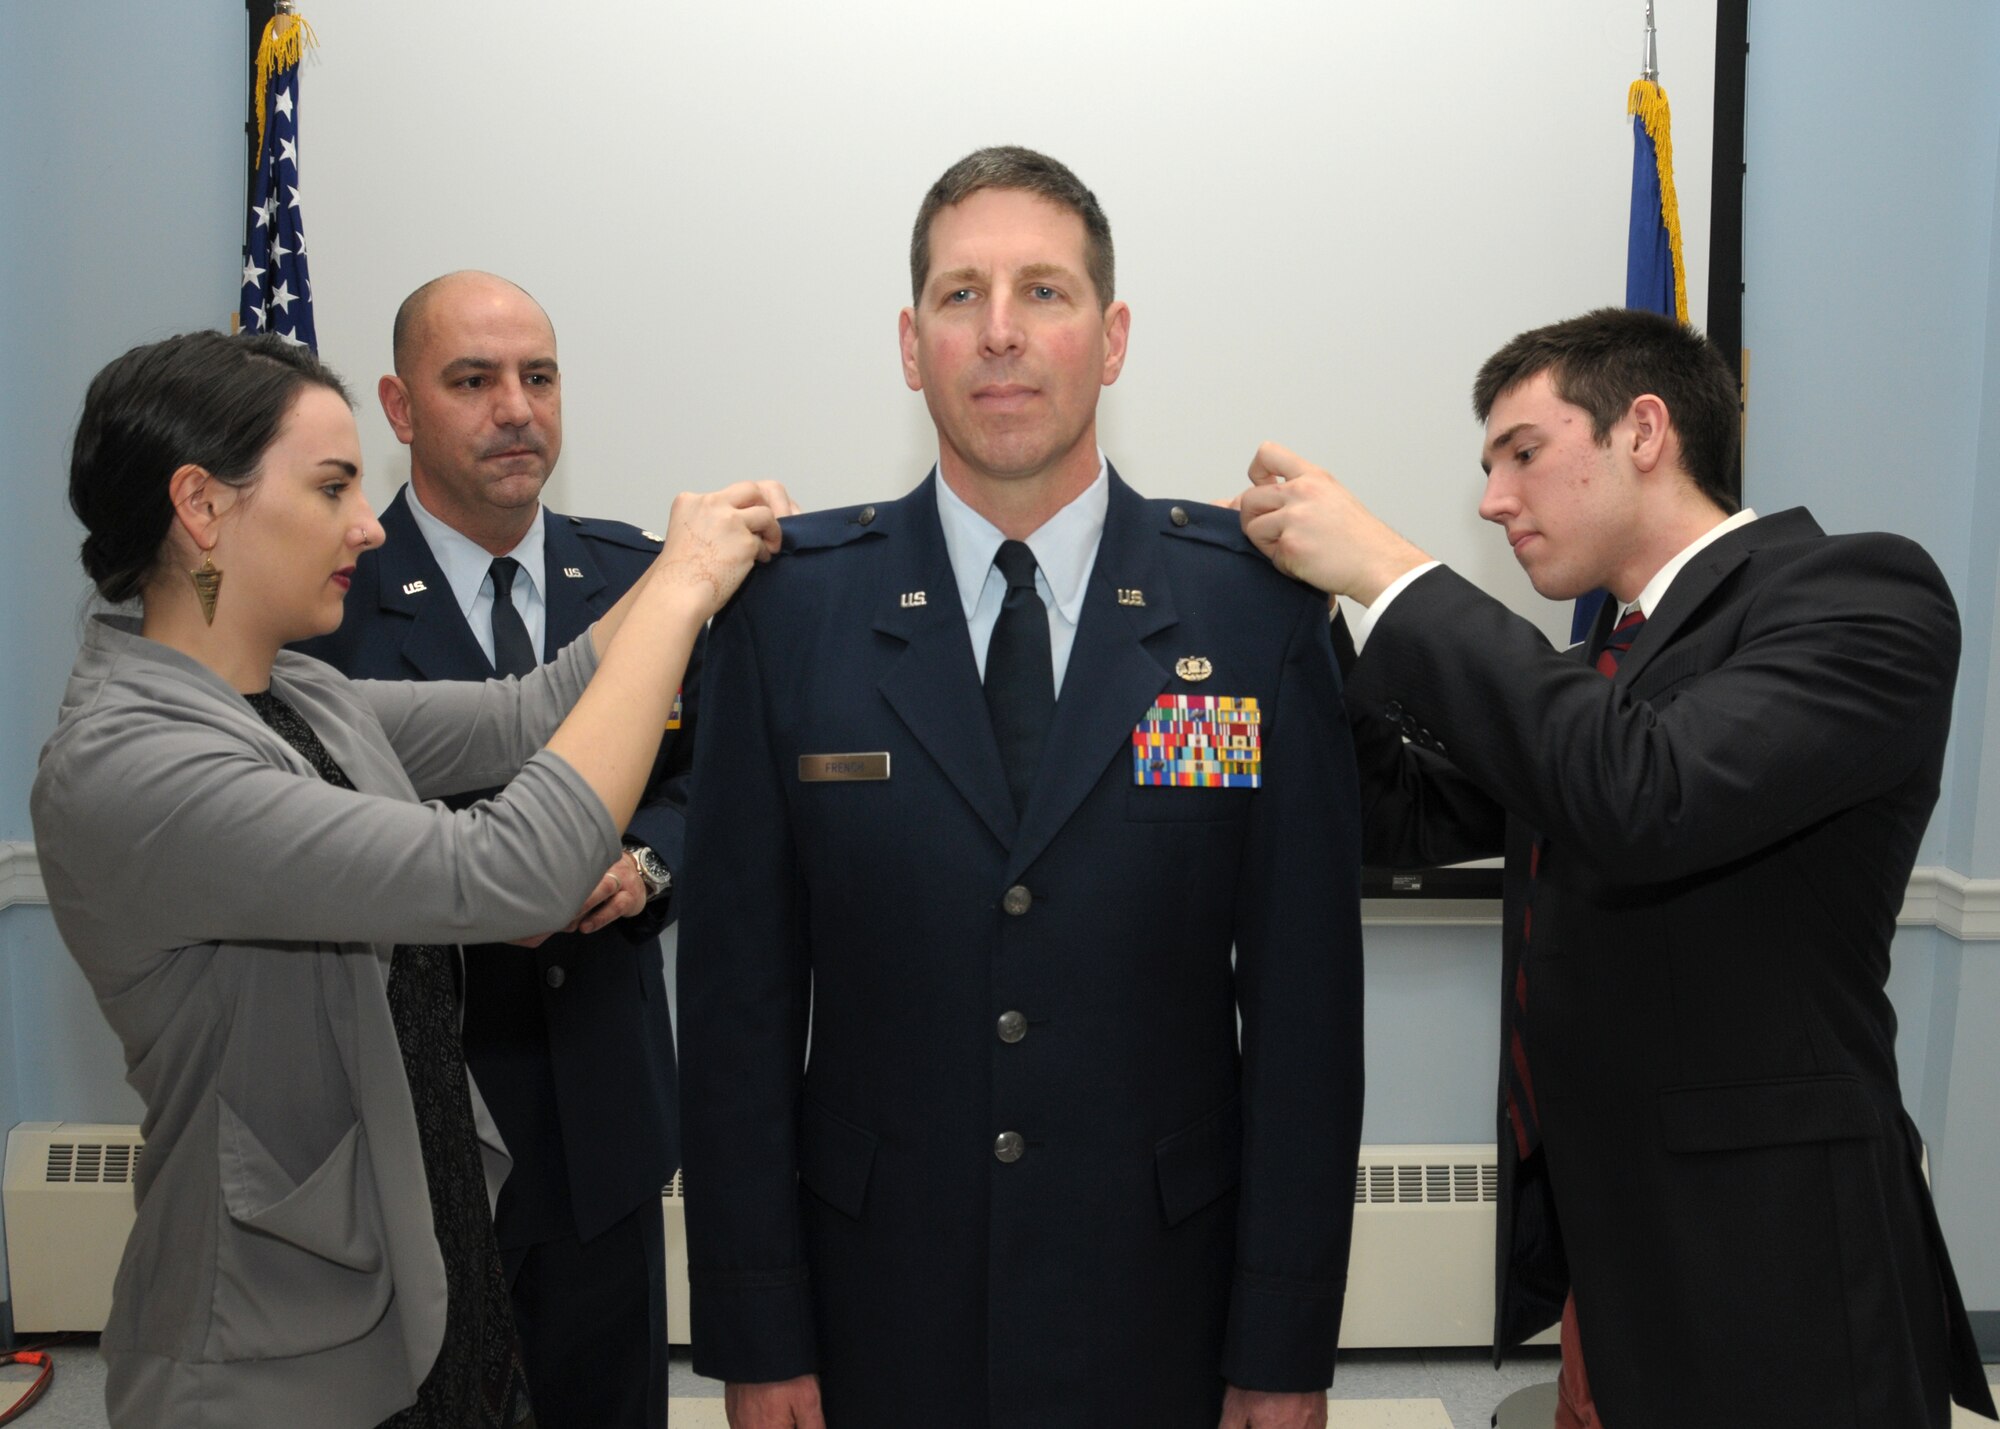 PEASE AIR NATIONAL GUARD BASE, N.H. -- Colonel Jed. J. French is pinned on the rank of colonel by his children, Amelia and Jacob French, during a promotion ceremony, Pease Air National Guard Base, N.H., March 9 2014 as Lt. Col. Anthony Picano looks on. French is the Joint Judge Advocate for the N.H. National Guard, Joint Forces Headquarters. He enlisted in the United States Army in 1983 and served  in the Calvary along the border with East and West Germany. French is a graduate of the University of Maine Law School and served in Afghanistan during 2010-2011. (U.S. Air National Guard photo by Staff Sgt. Curtis J. Lenz)